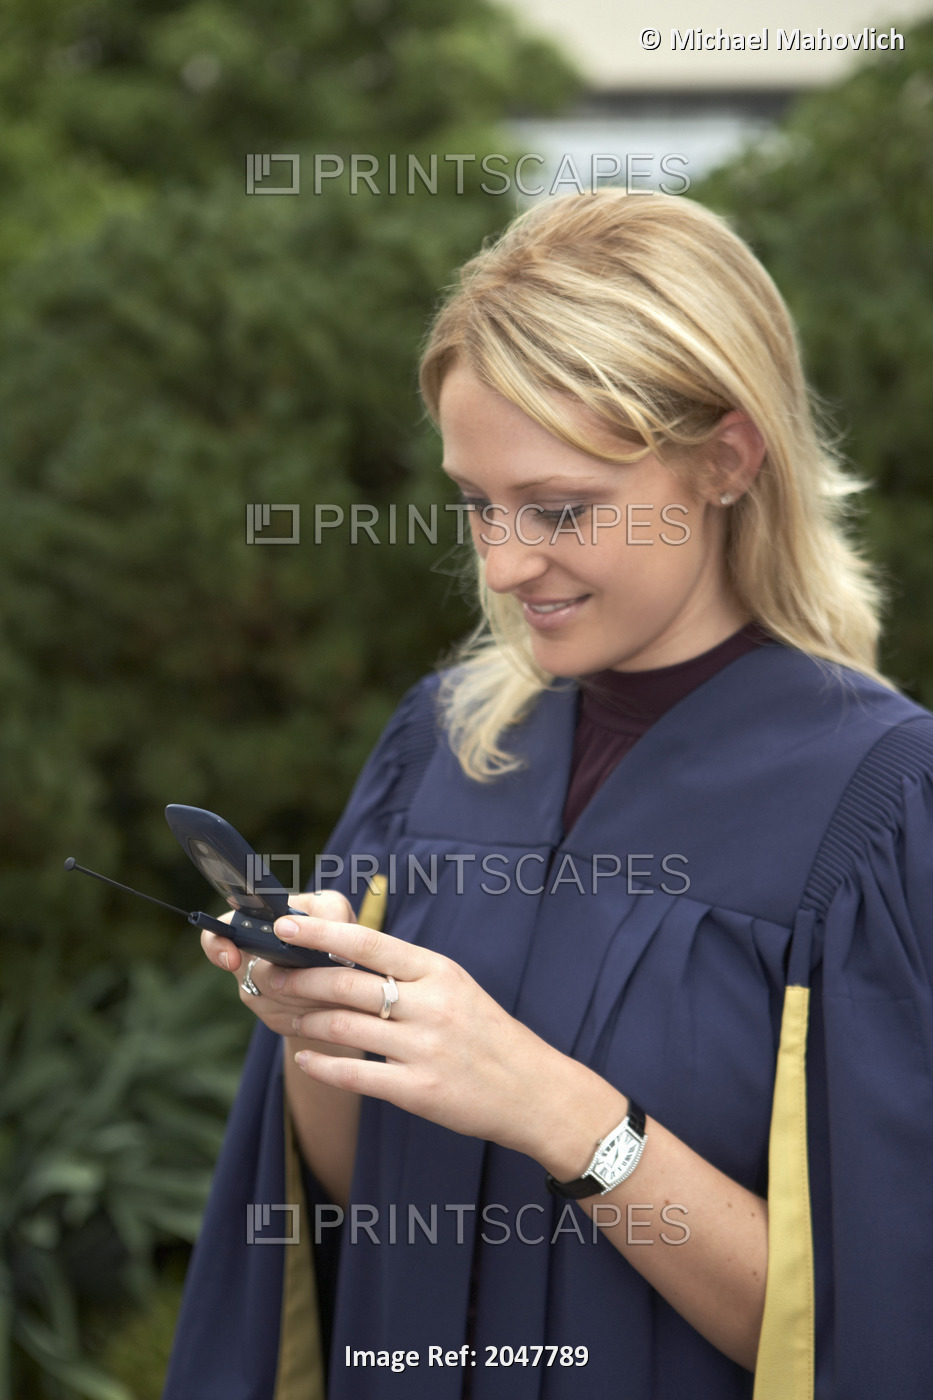 Woman In Graduation Gown Holding Cell Phone, Toronto, Ontario